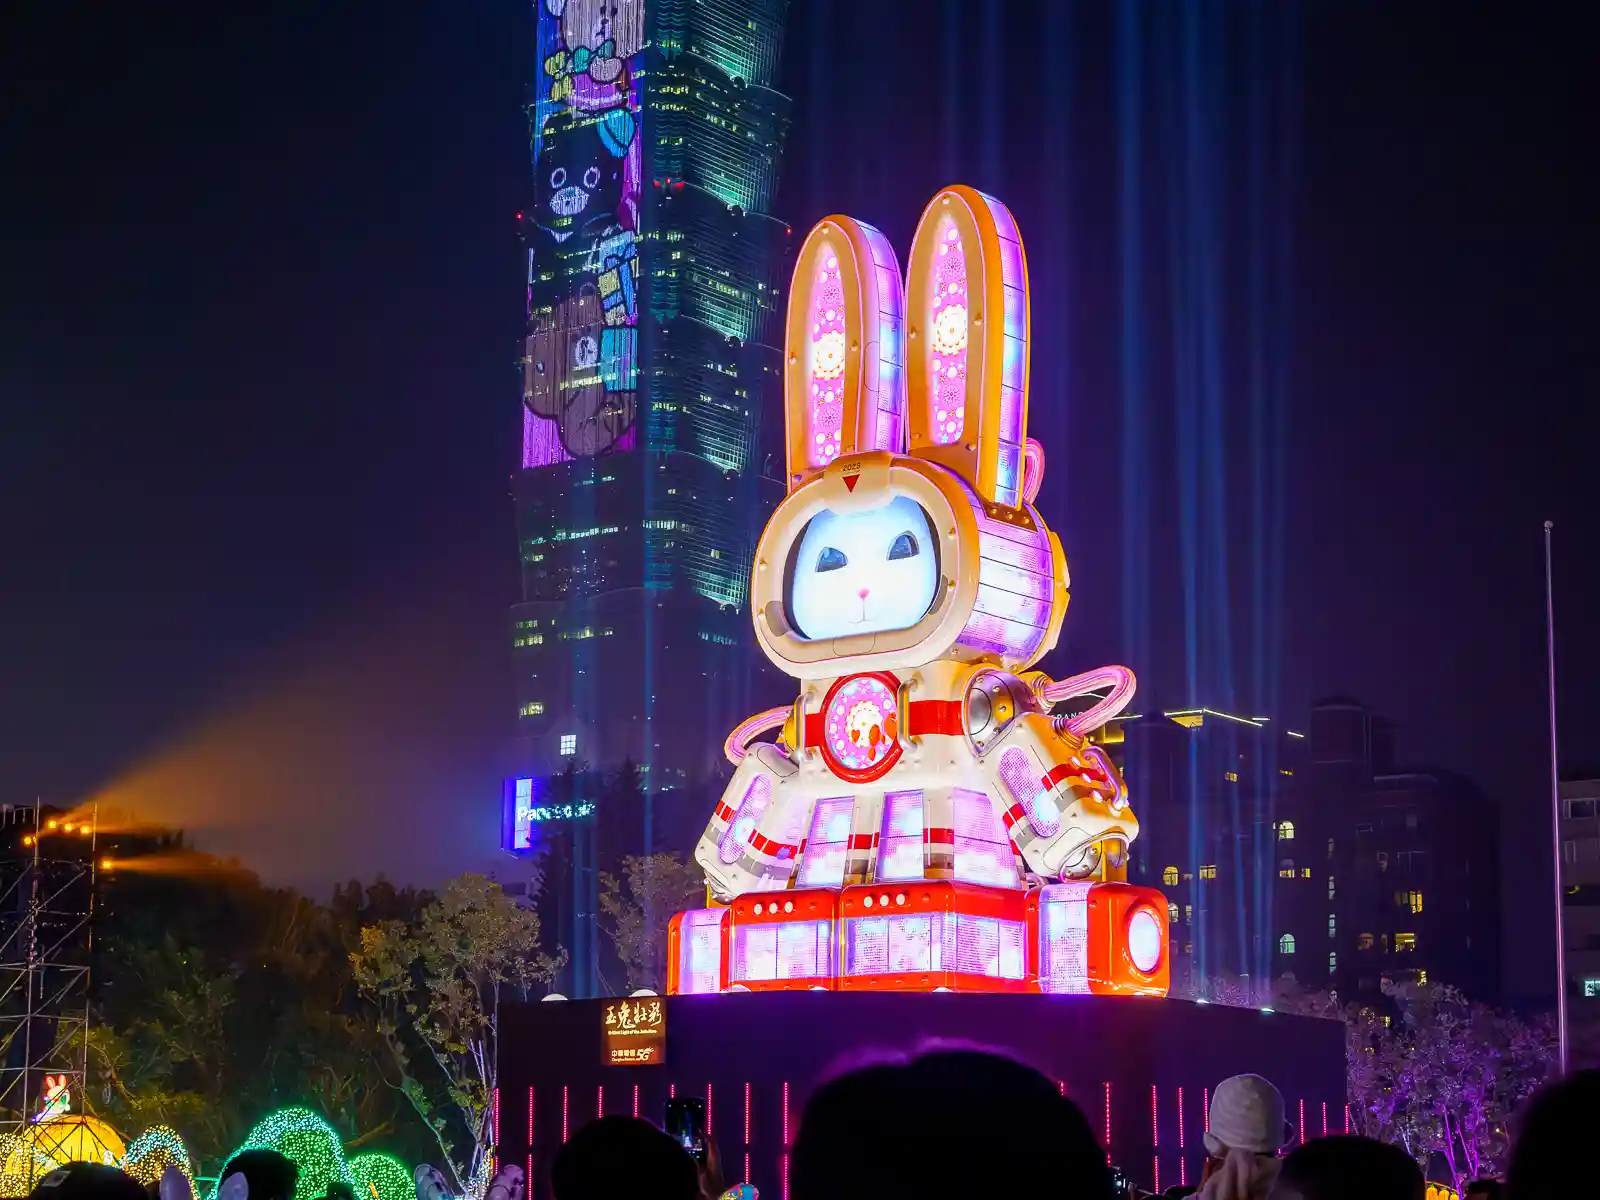 The main lantern for the 2023 Lantern Festival in Taipei, a gigantic robot rabbit, can be seen with Taipei 101 in the background.